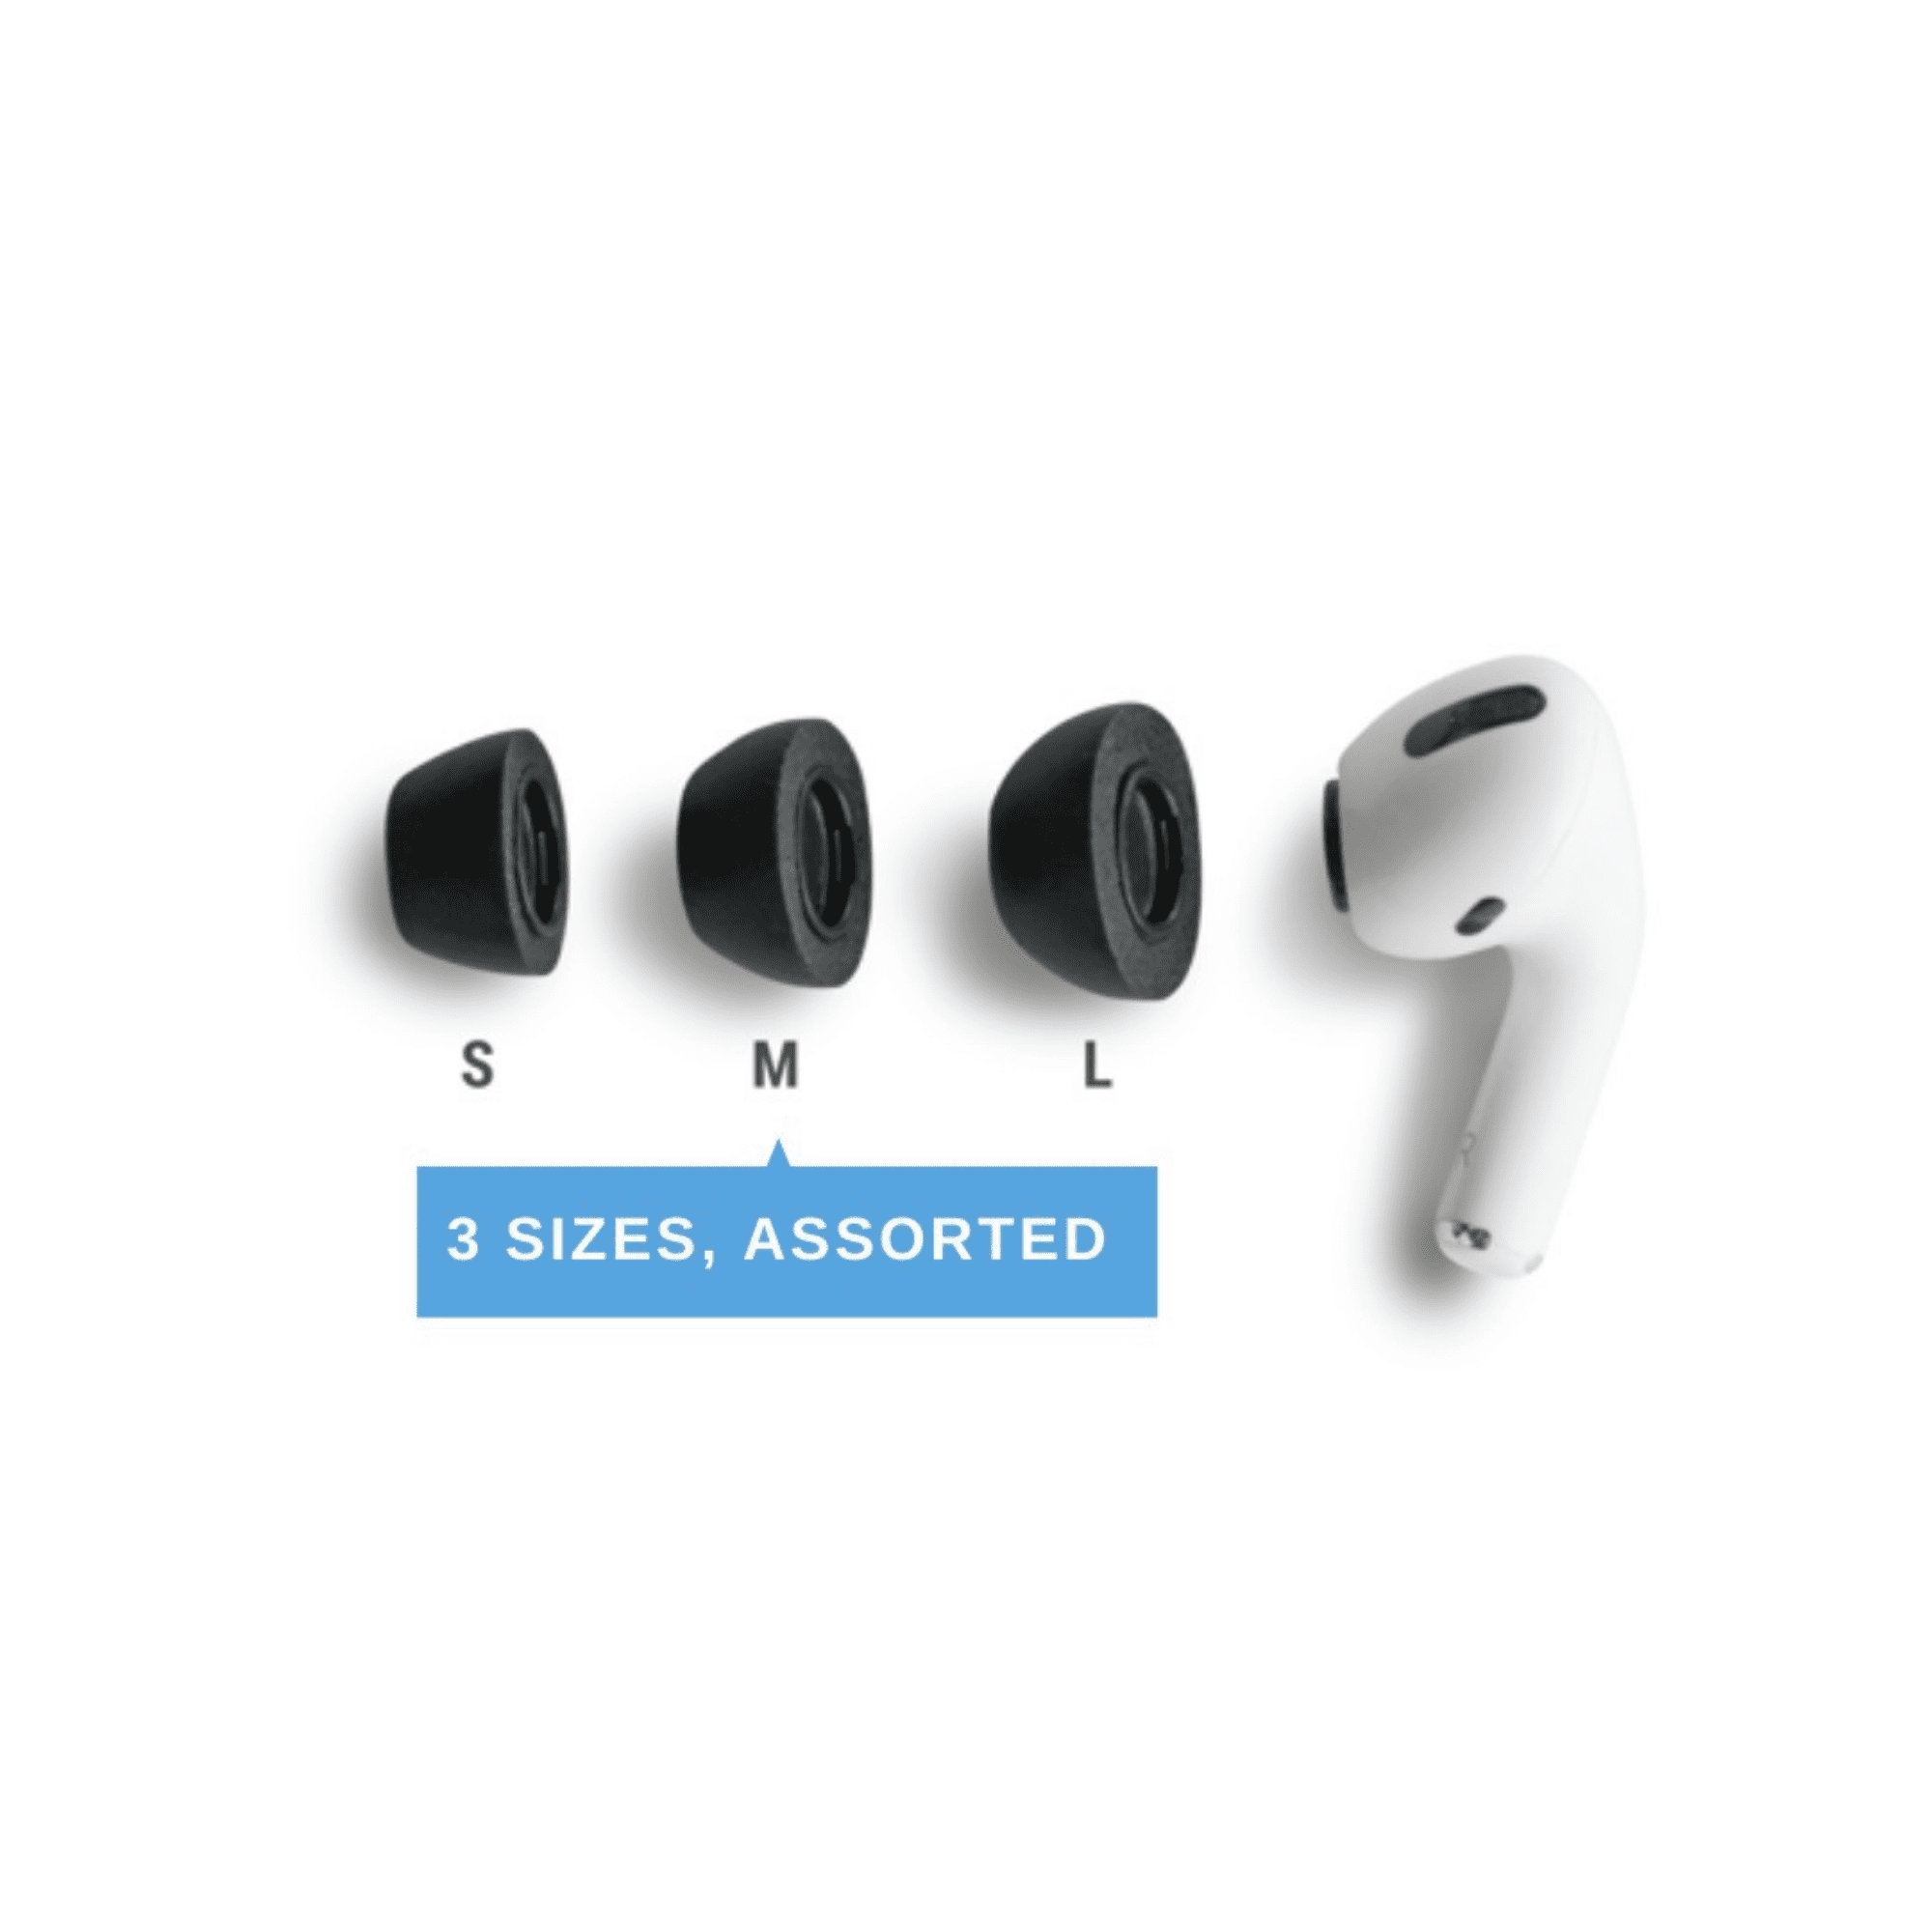 COMPLY Foam Apple AirPods Pro Earbud Tips, 3-Pack, Assorted, for Comfortable, Noise-Canceling that Click On, and Stay Put - Walmart.com